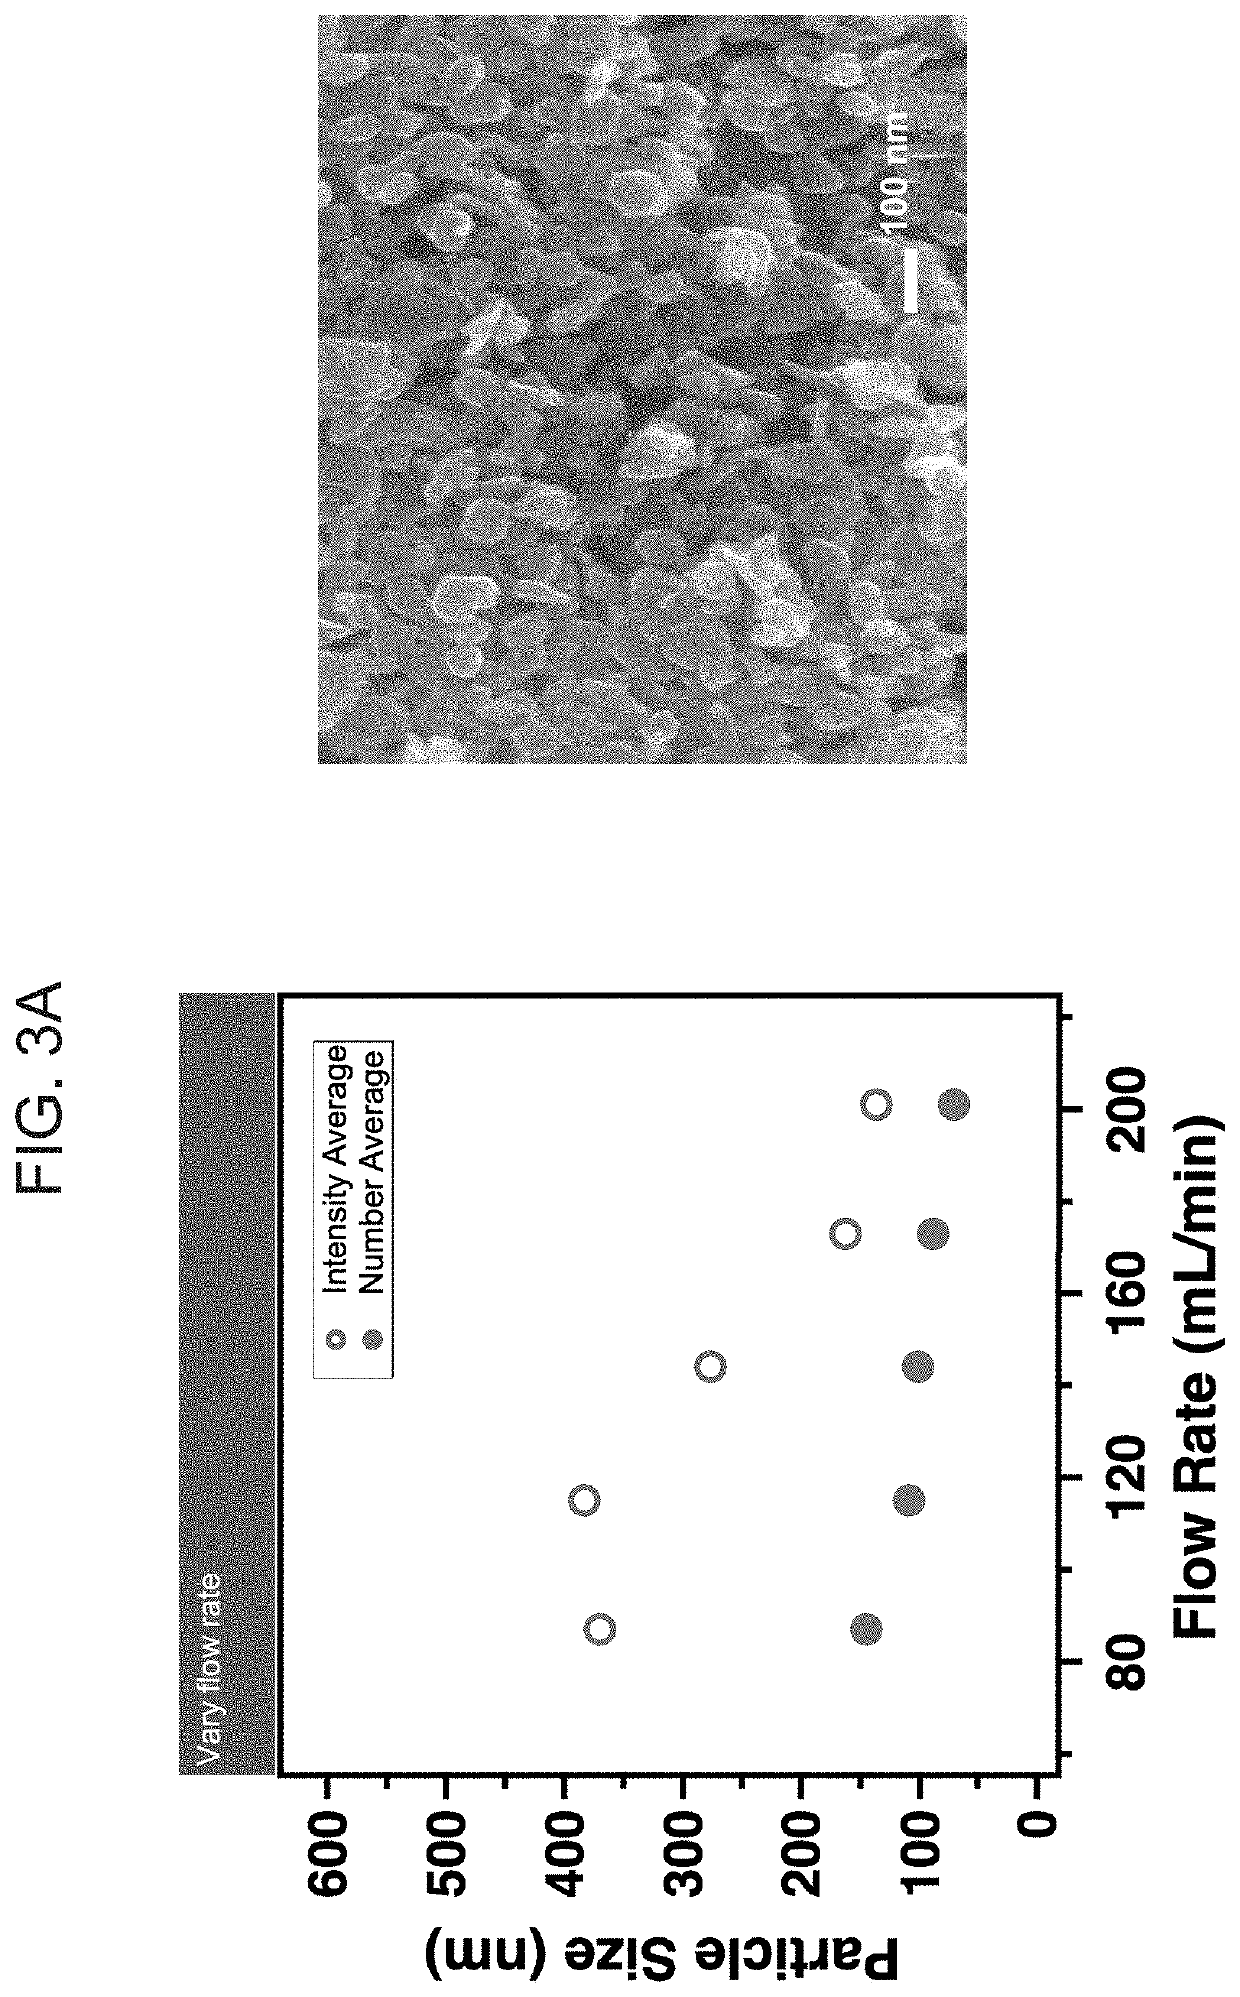 Process for rapidly manufacturing ultrasmall phase-change vo2 nanomaterial